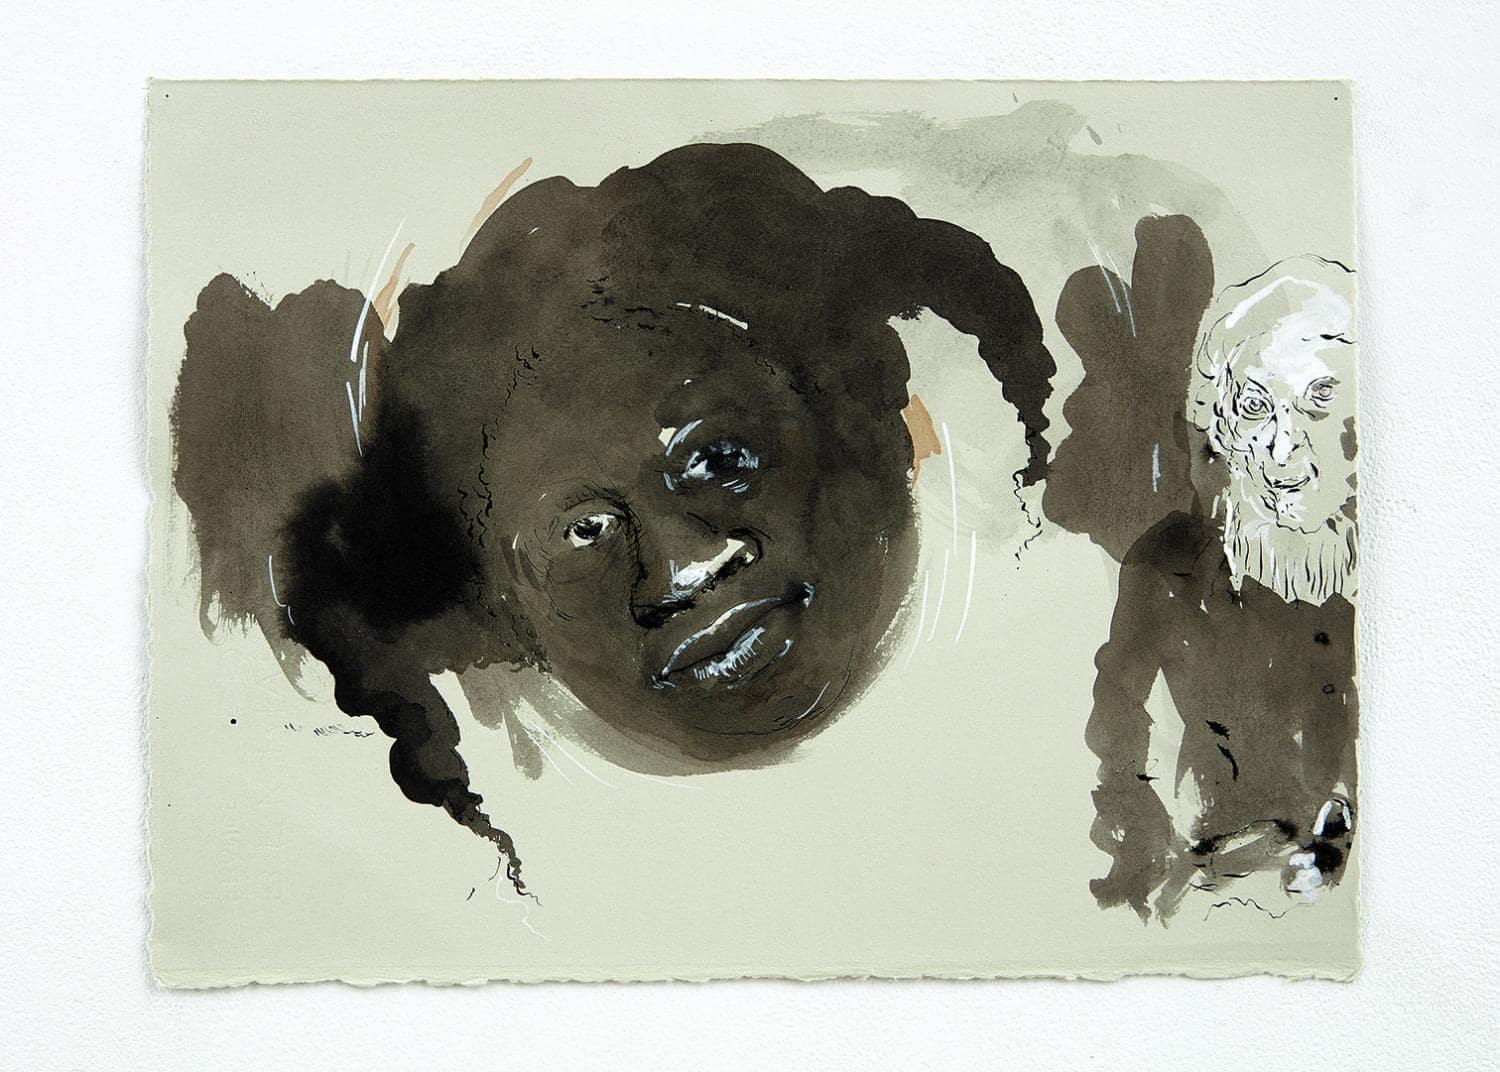 Untitled, 2018
Kara Walker

Photolithograph, on Rives BFK paper
Signed and numbered from the edition of 75
From 'The Gross Clinician Presents: Pater Gravidam'
Sheet: 27.5 × 38.1 cm (33 × 45.7)